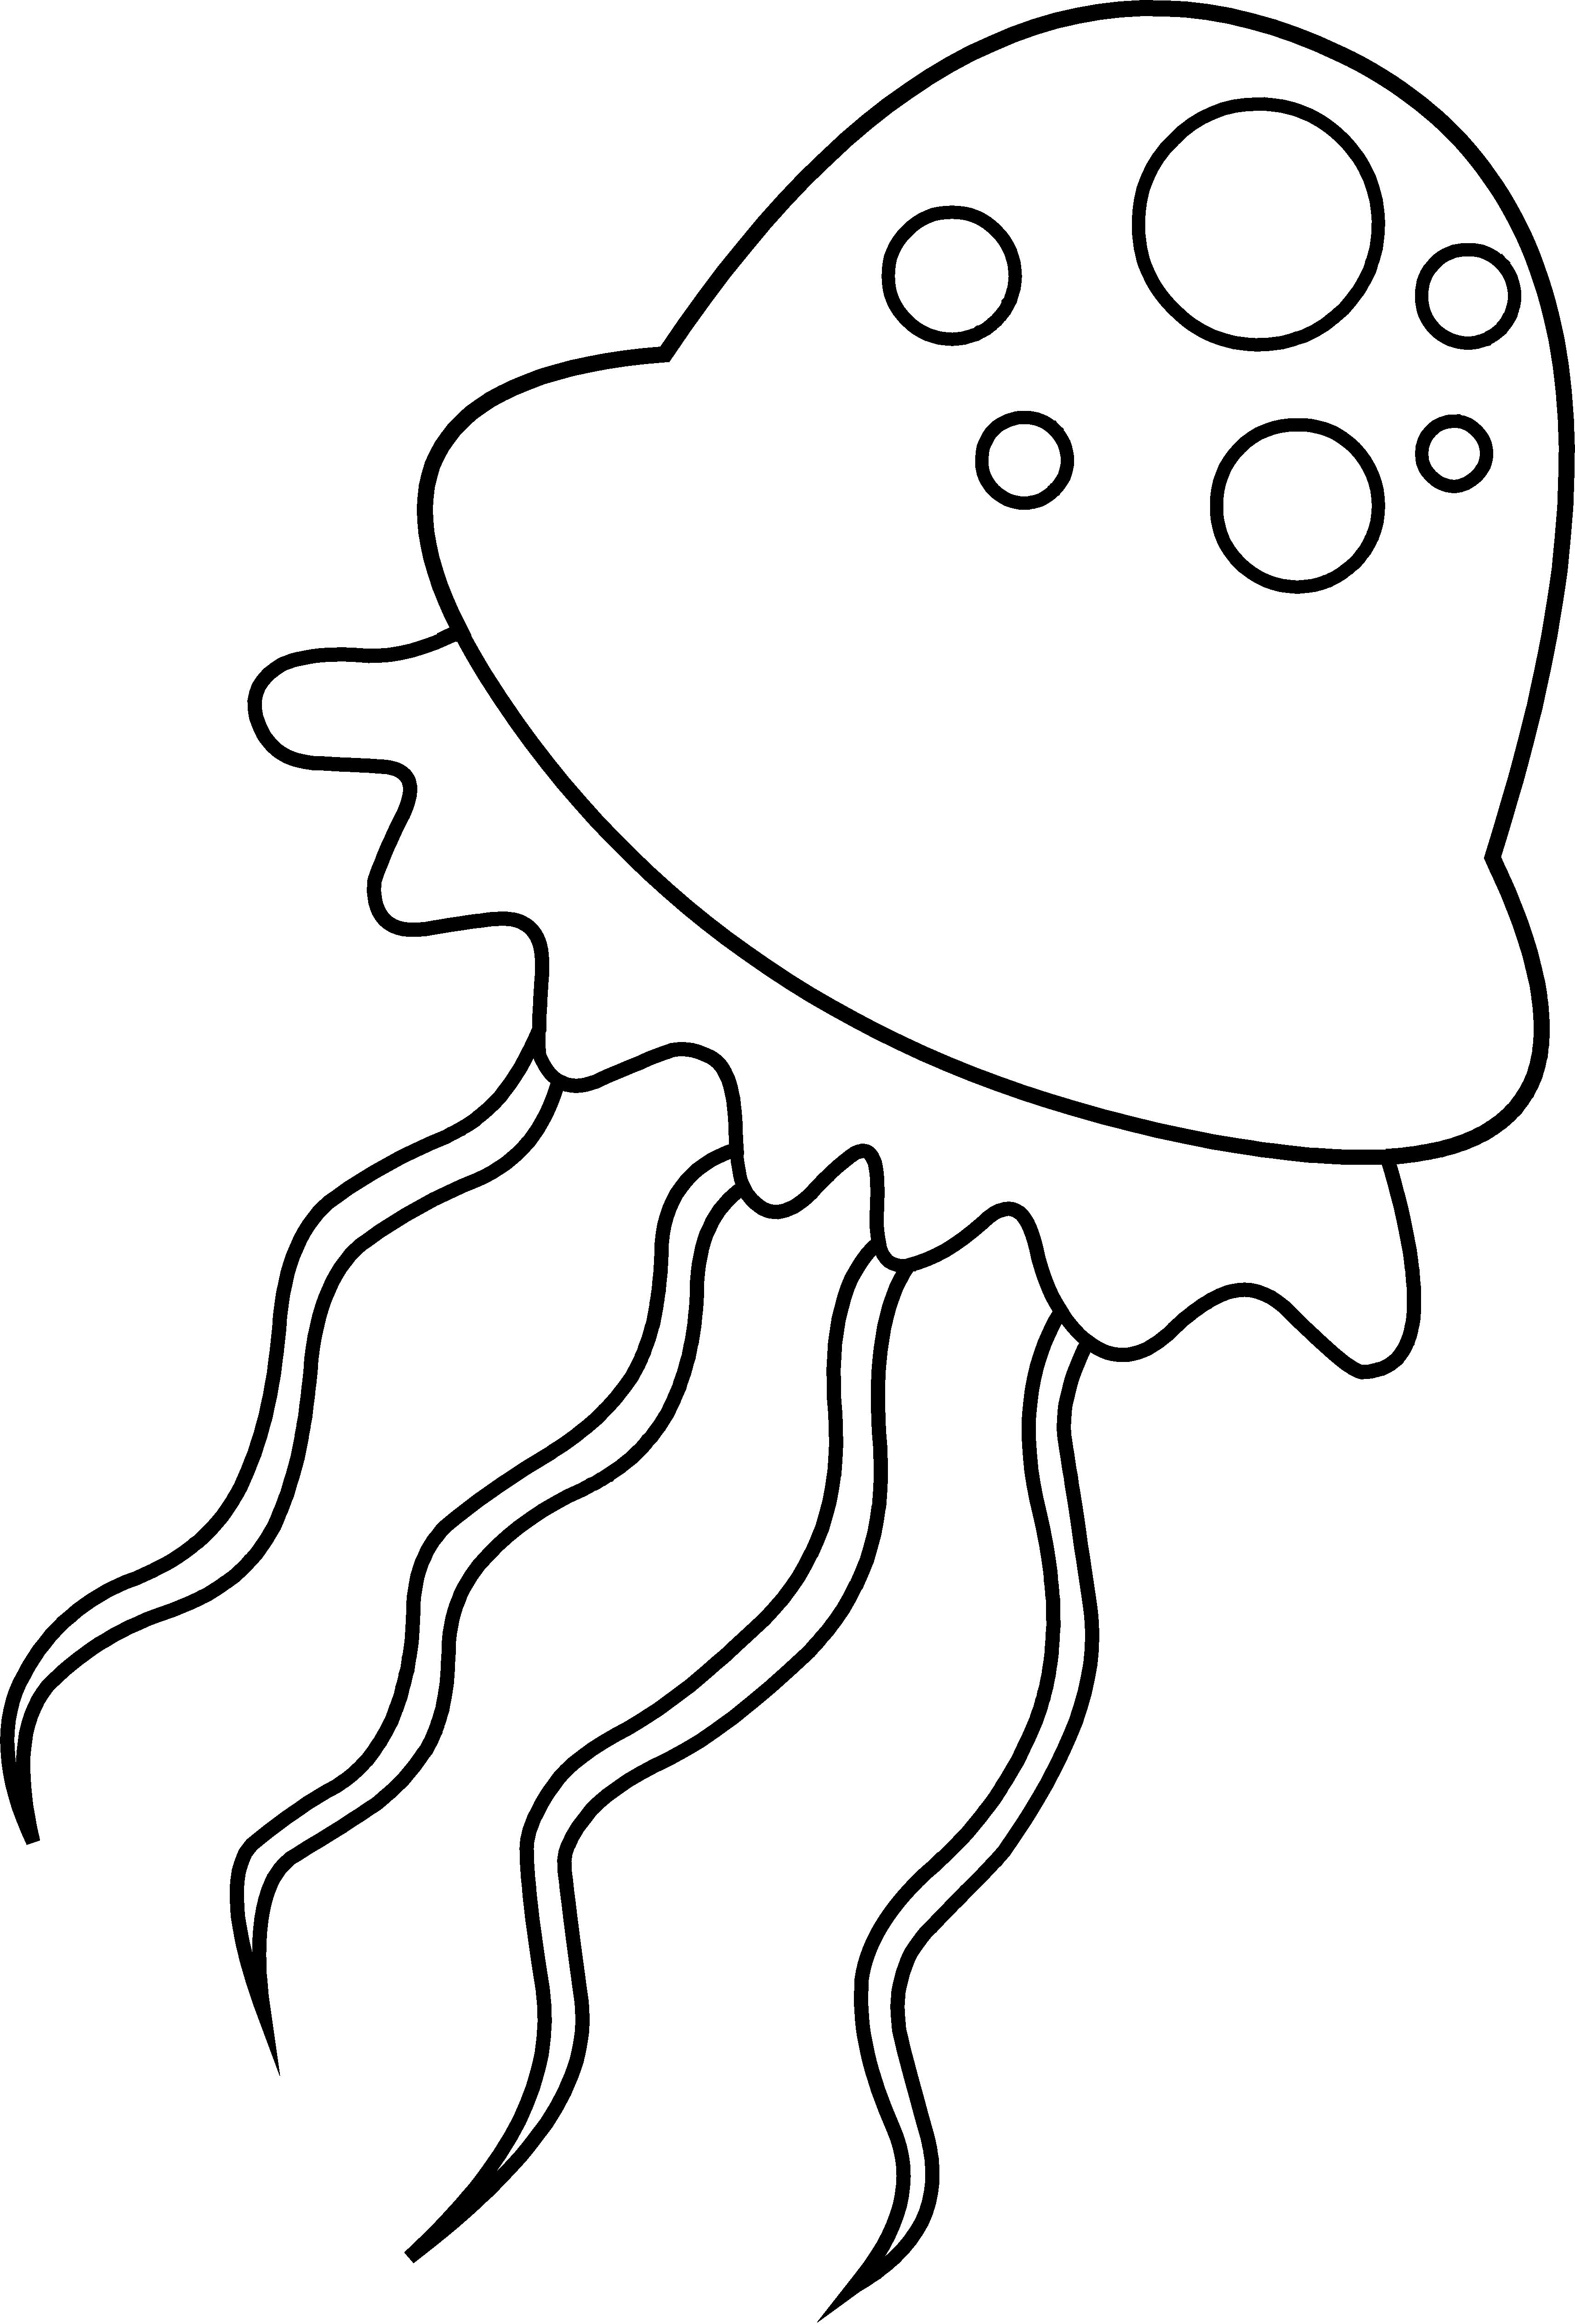 Clipart ocean jellyfish. Coloring page free clip